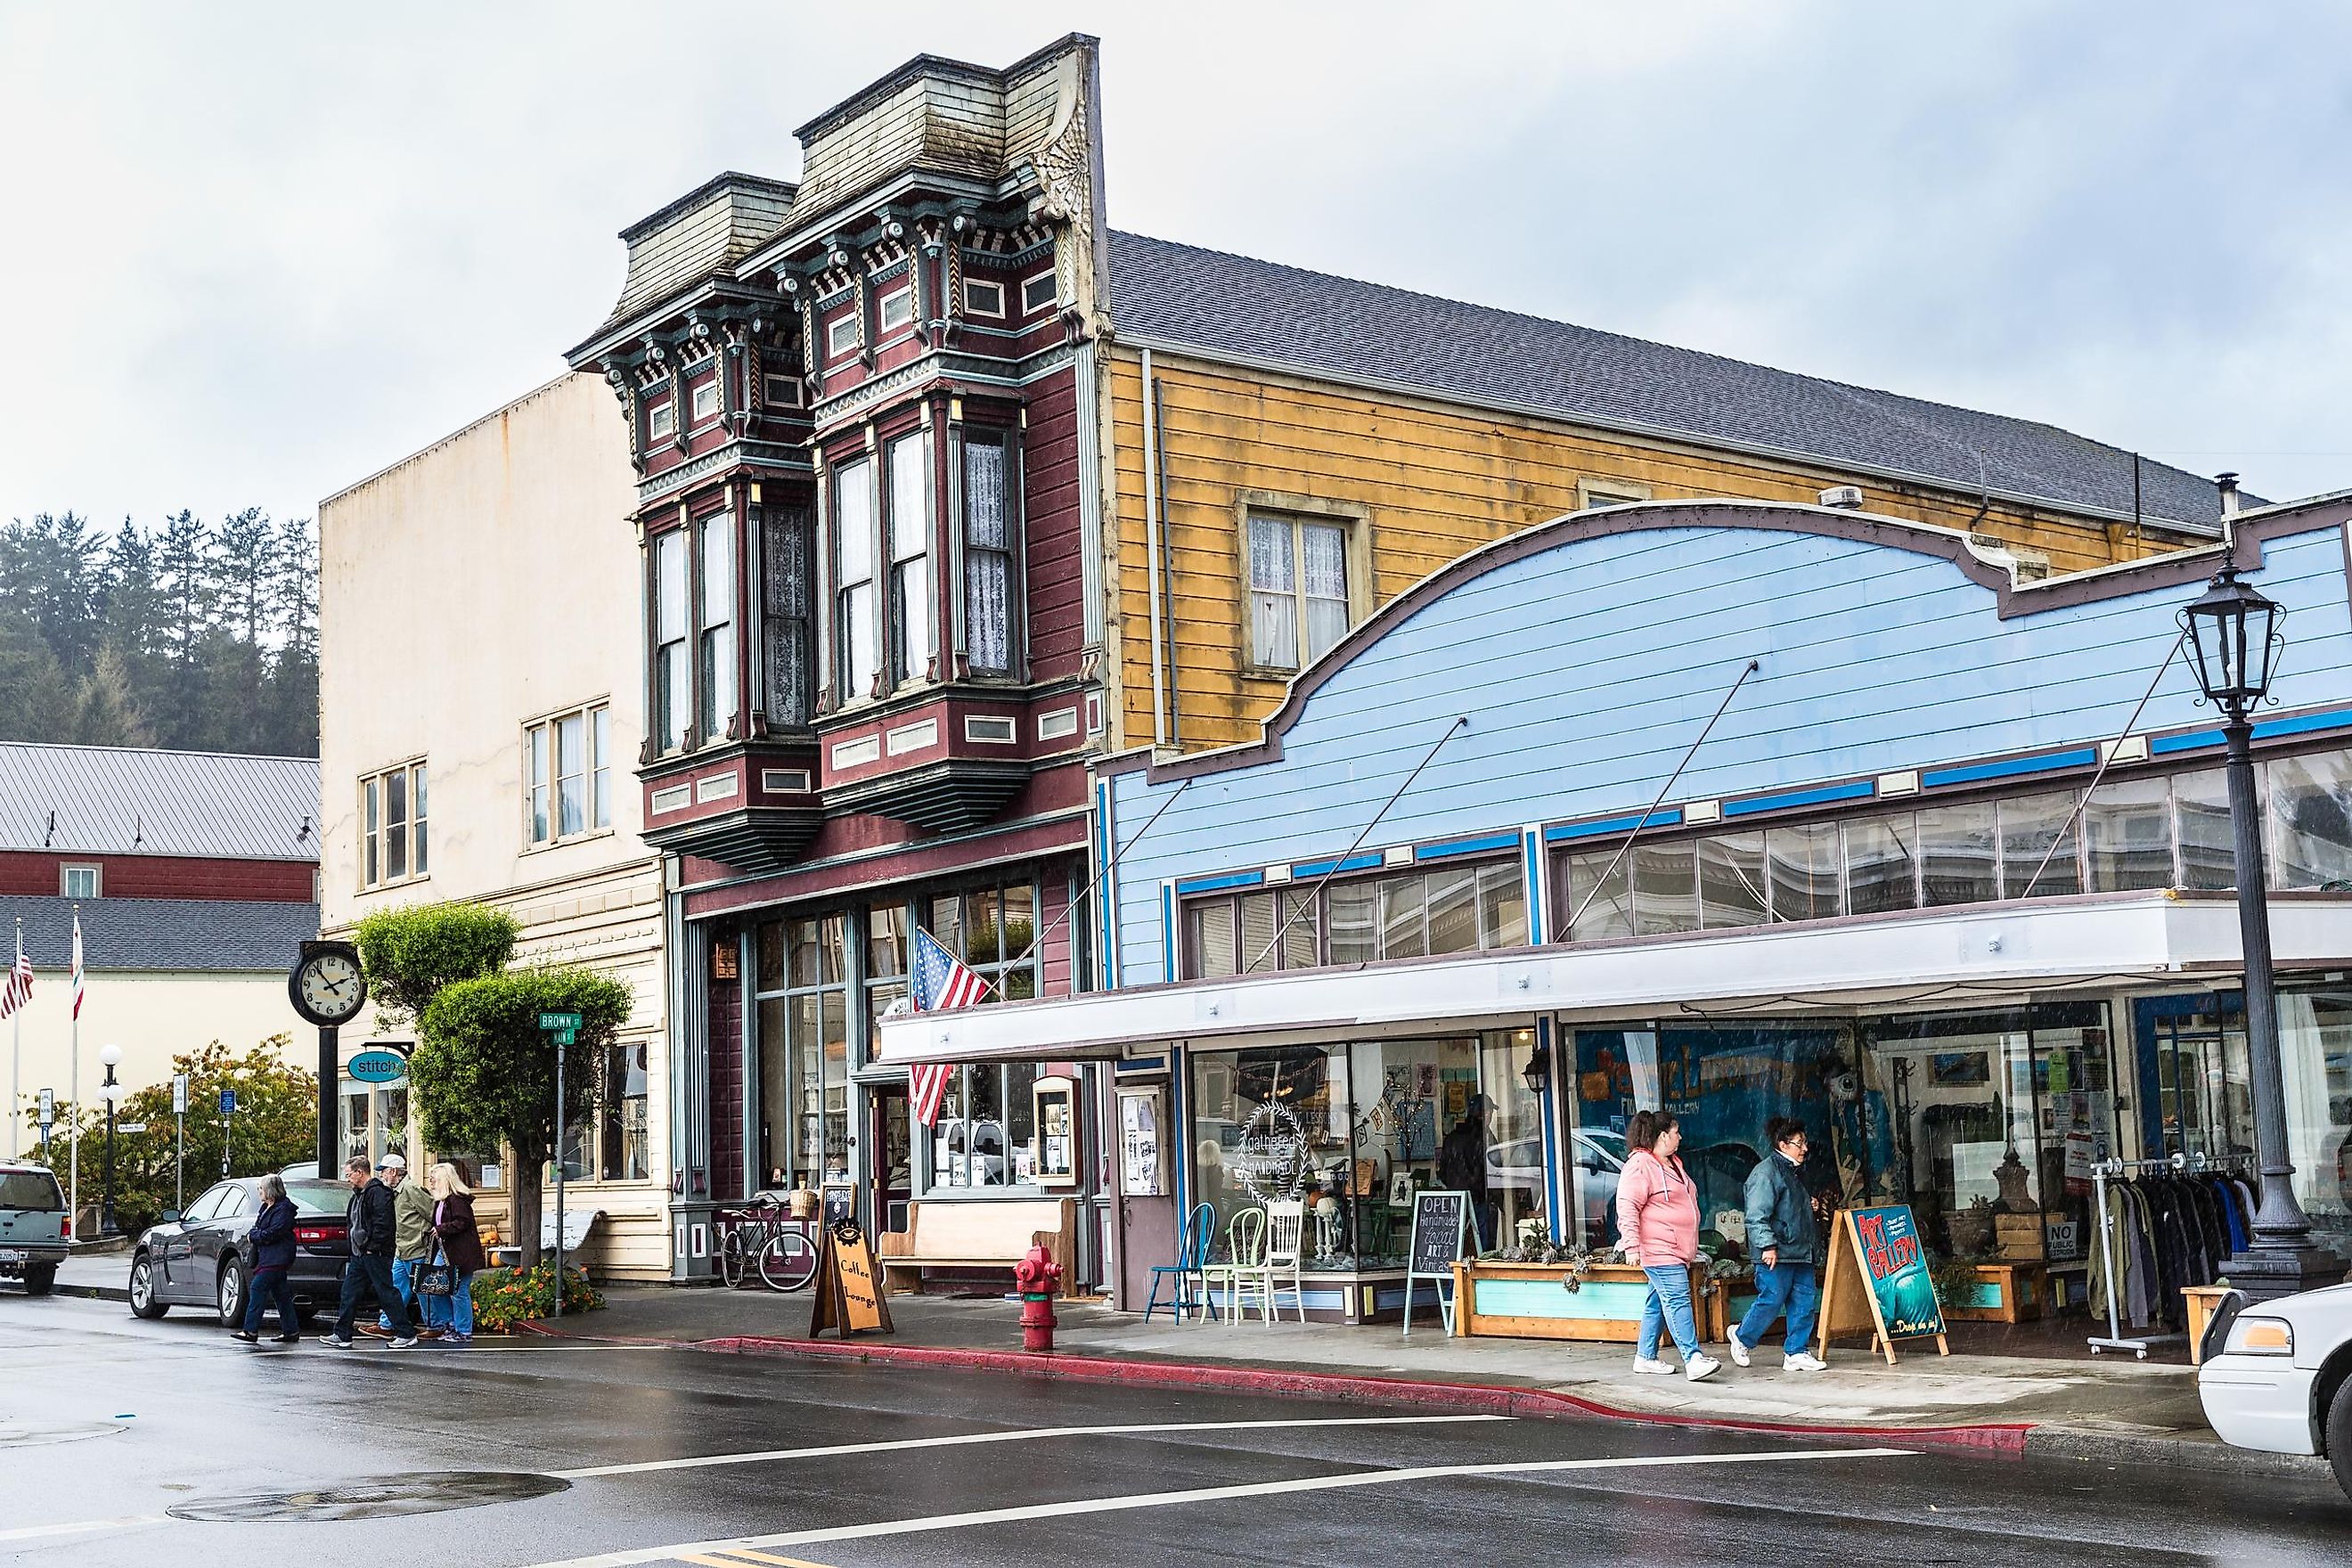 Locals and tourists shopping in the town of Ferndale, Humboldt County, California